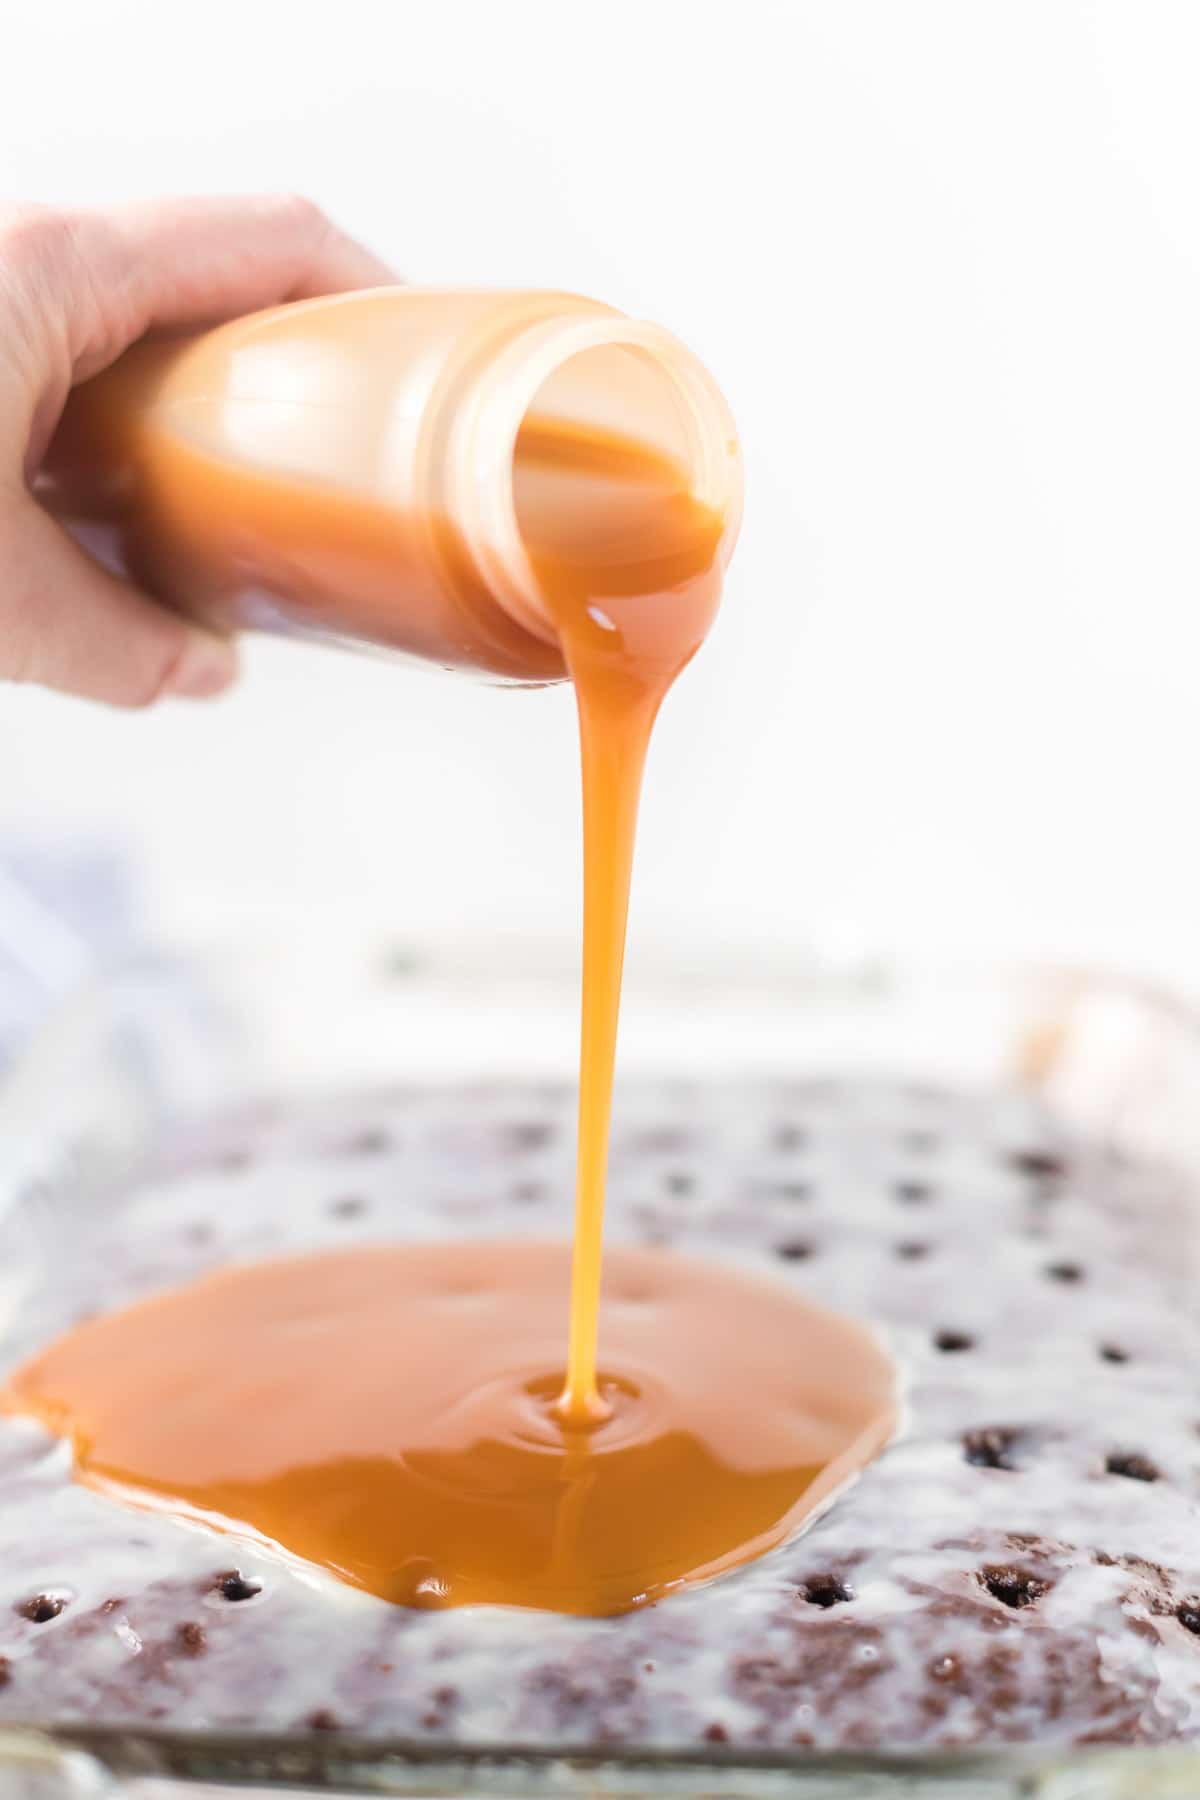 Pouring caramel over chocolate cake